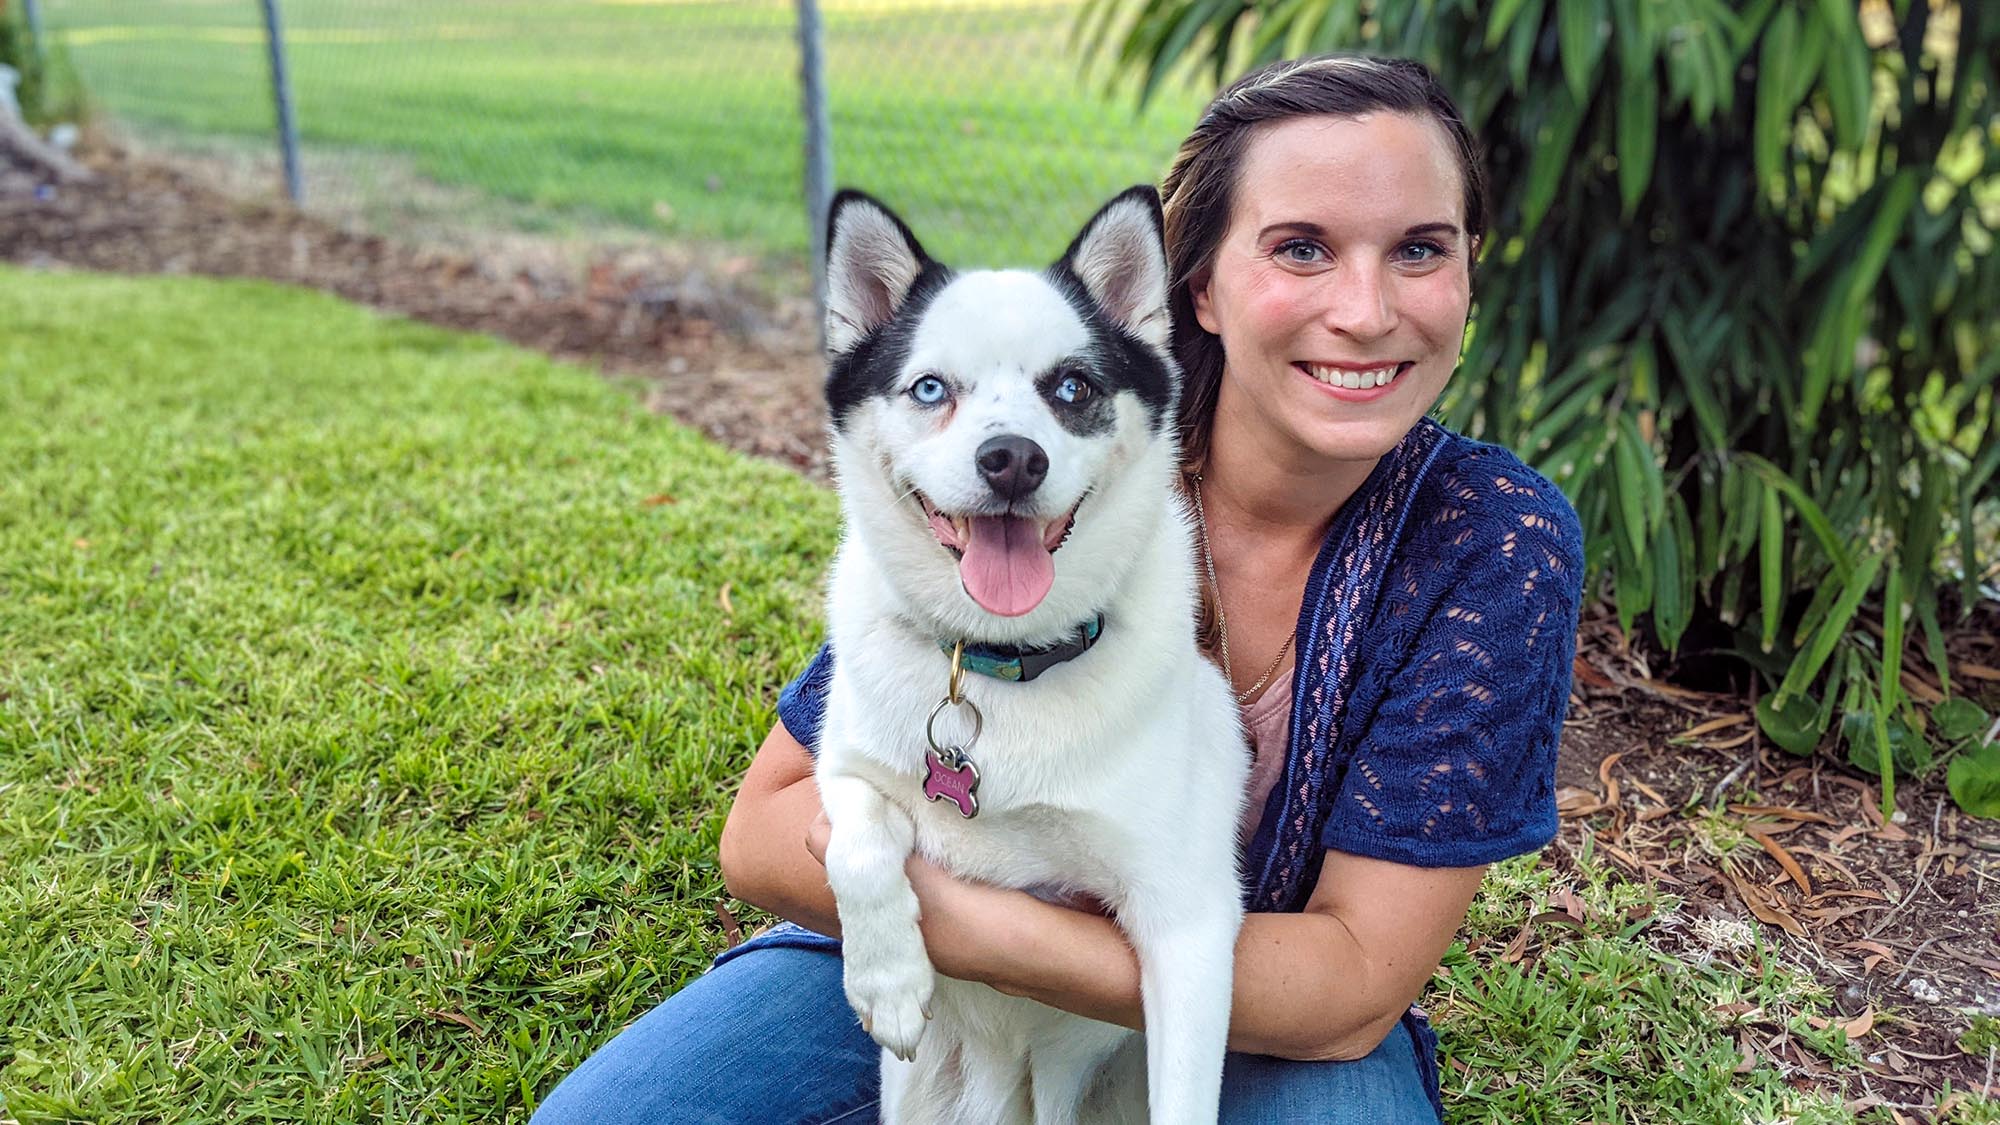 For Incorporating her Pet into Learning, a Coral Springs Teacher Wins a Pet Supermarket Contest